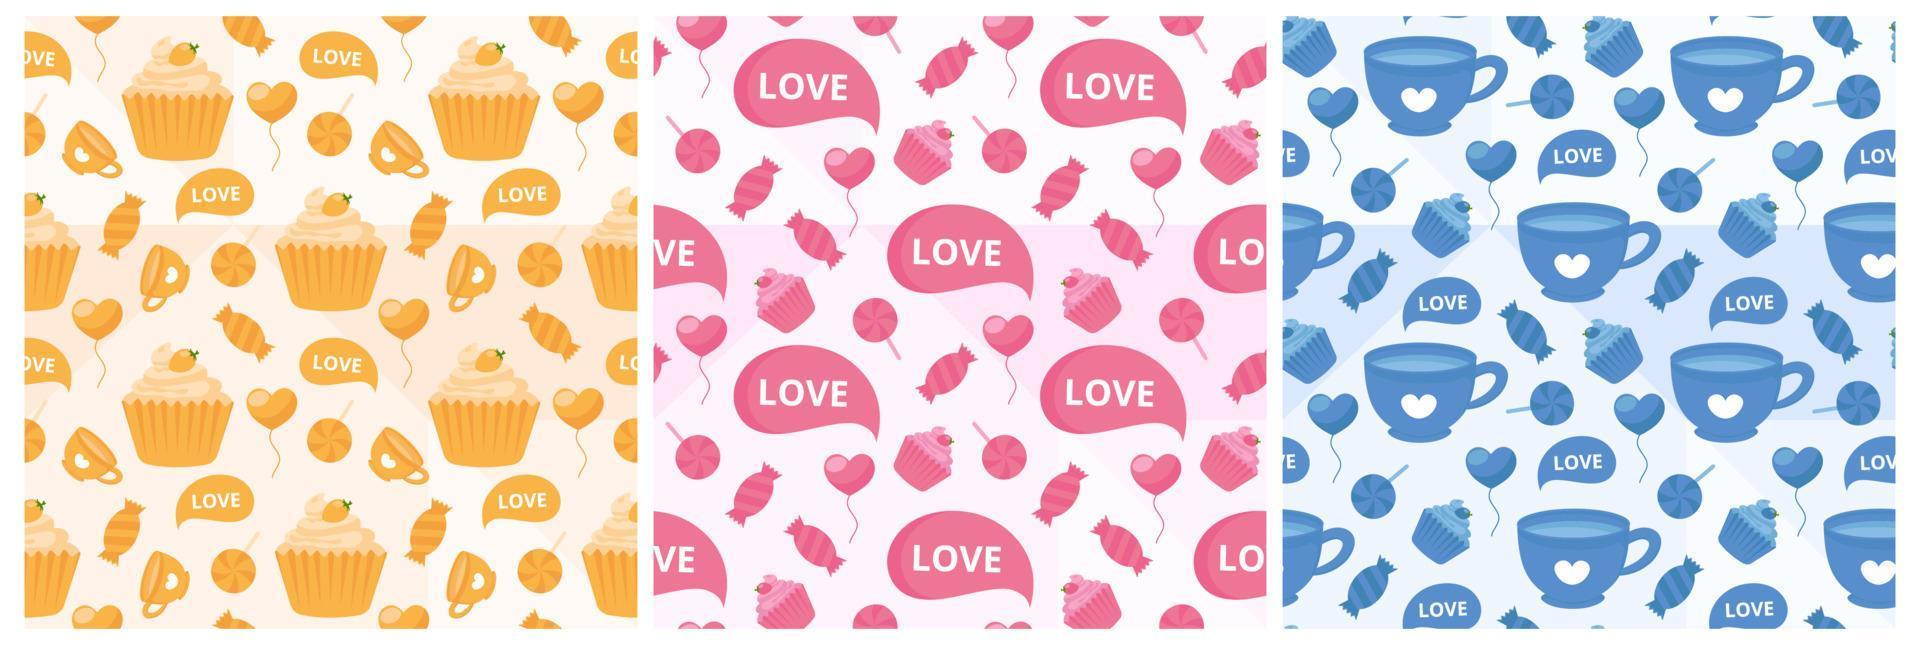 Set of Happy Valentines Day Seamless Pattern Design Love Greeting Card Template Hand Drawn Cartoon Flat Illustration vector